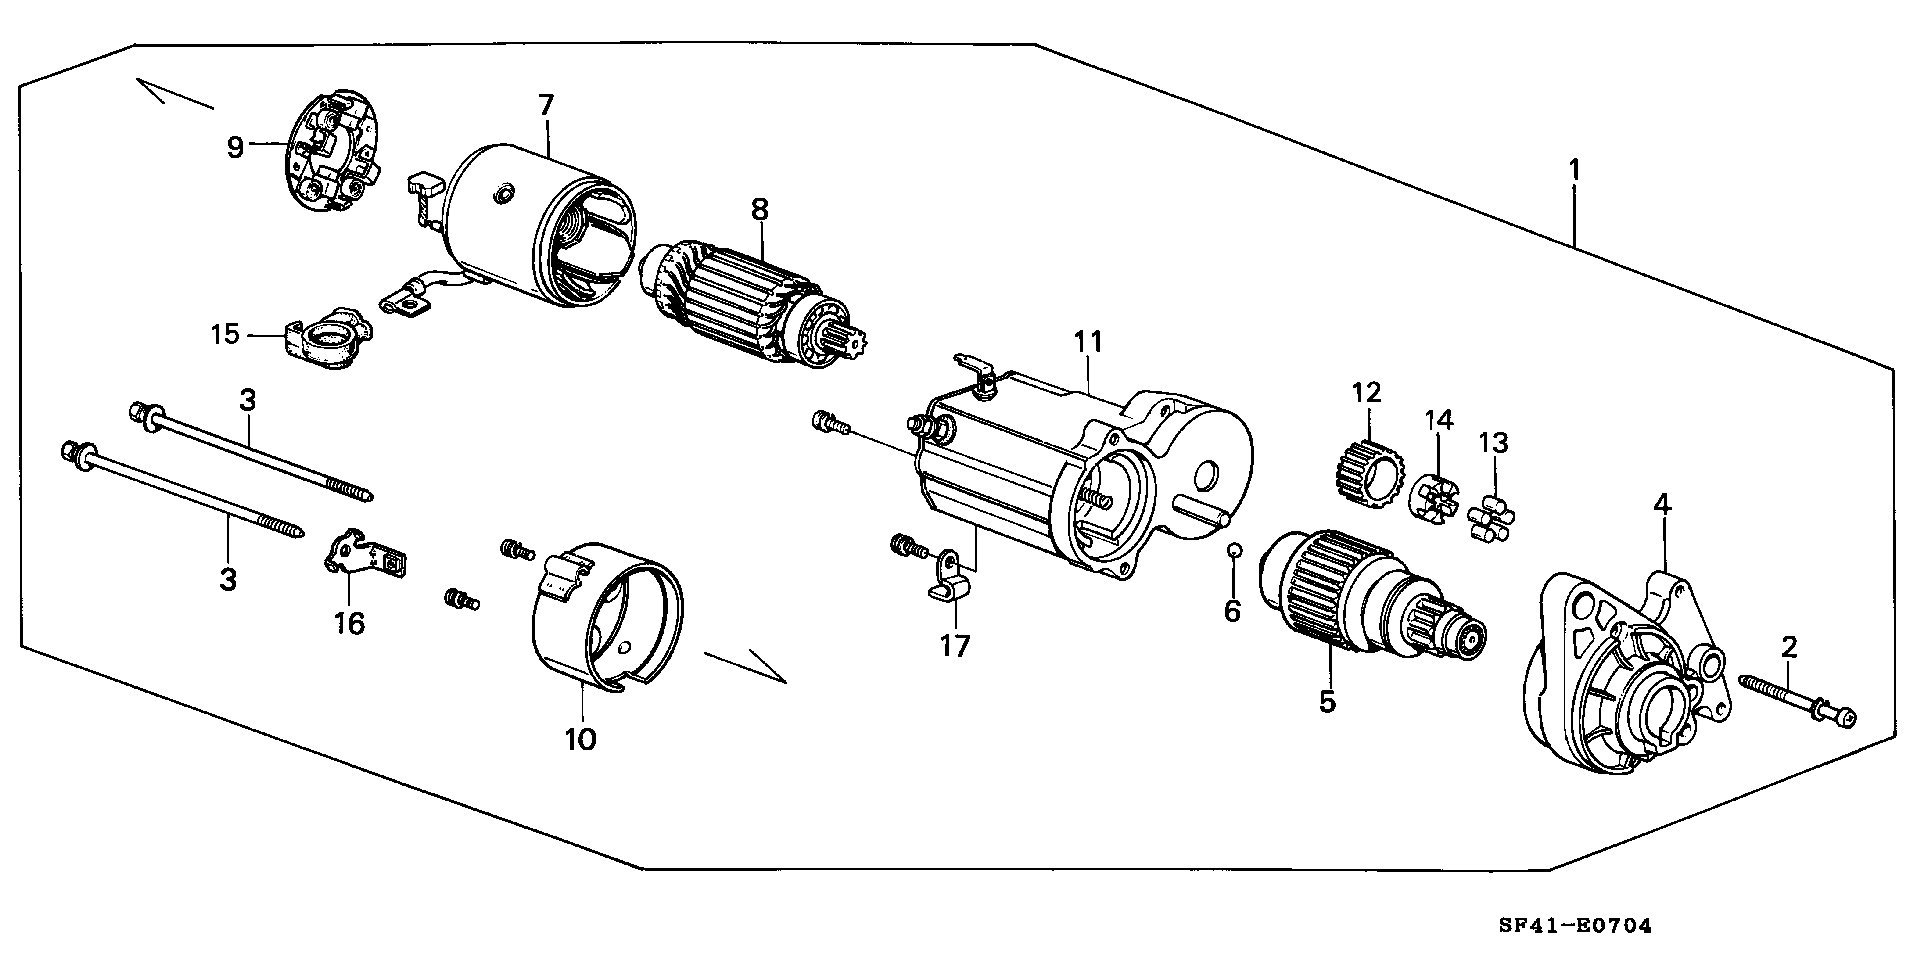 STARTER MOTOR  COMPONENT PARTS (1.2KW/DENSO)